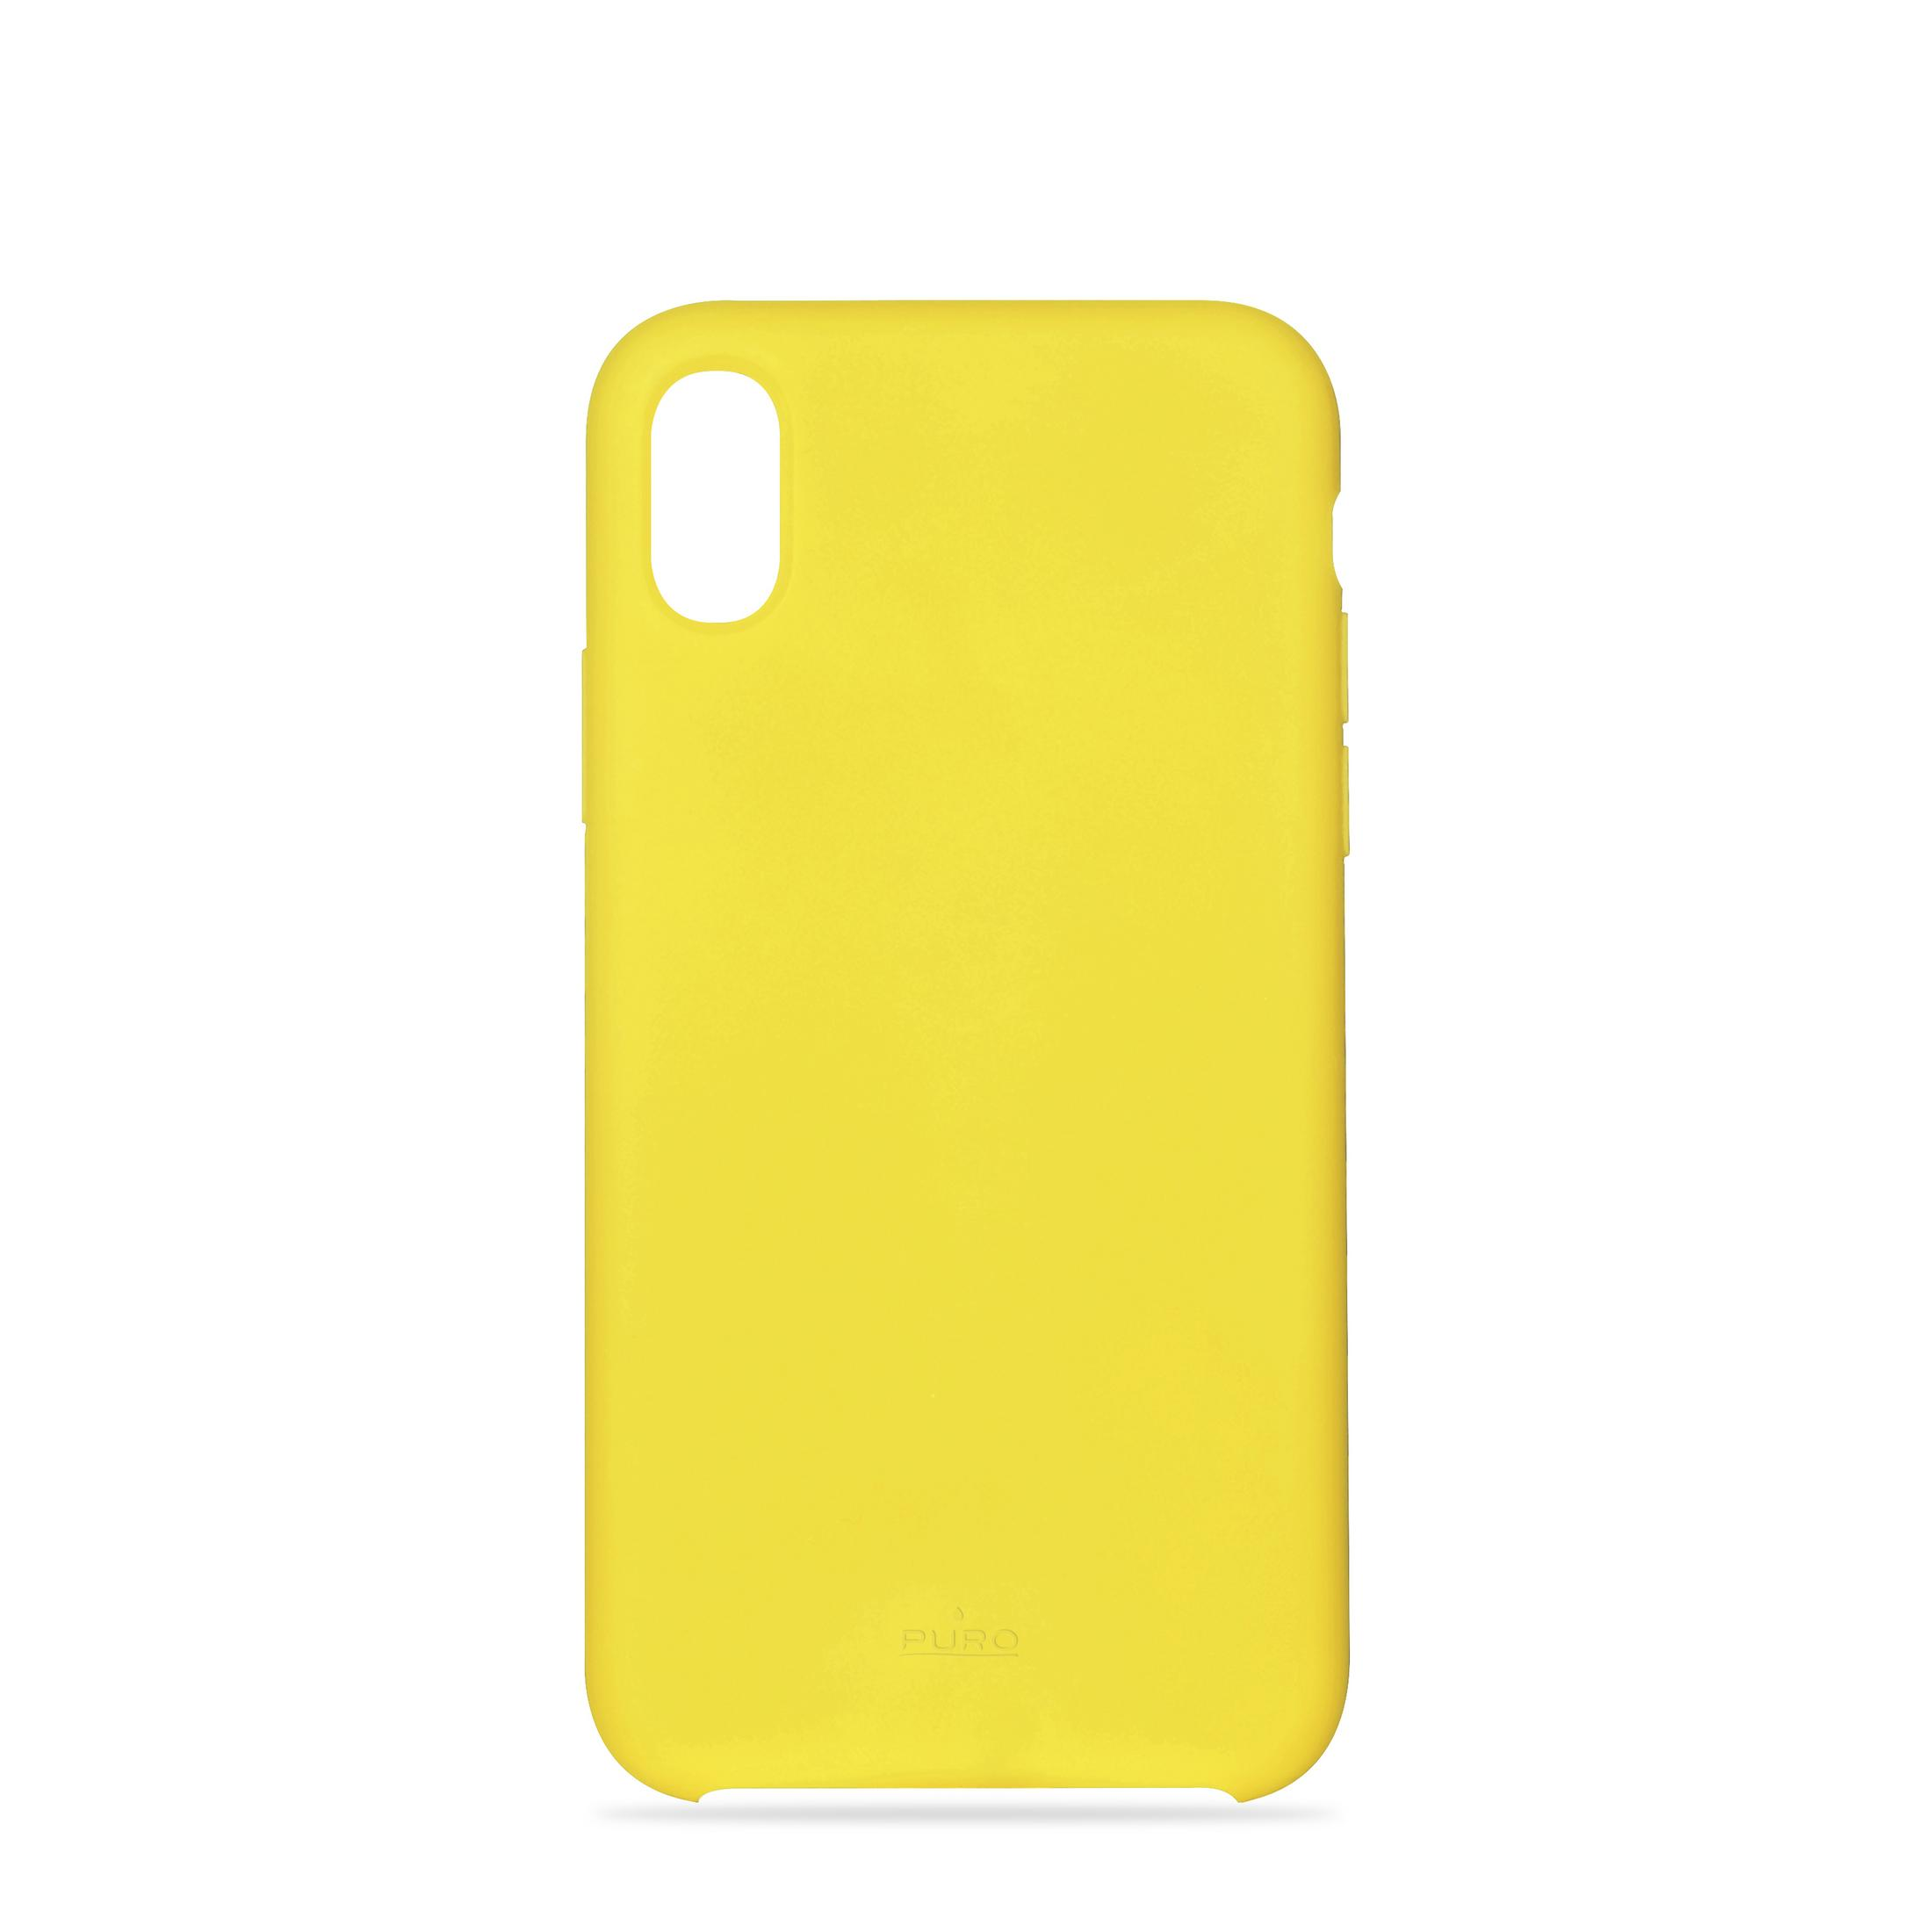 PURO IPCXICONYEL COVER SILICON FOR Gelb Backcover, Apple, YELLOW, iPhone X 5,8\